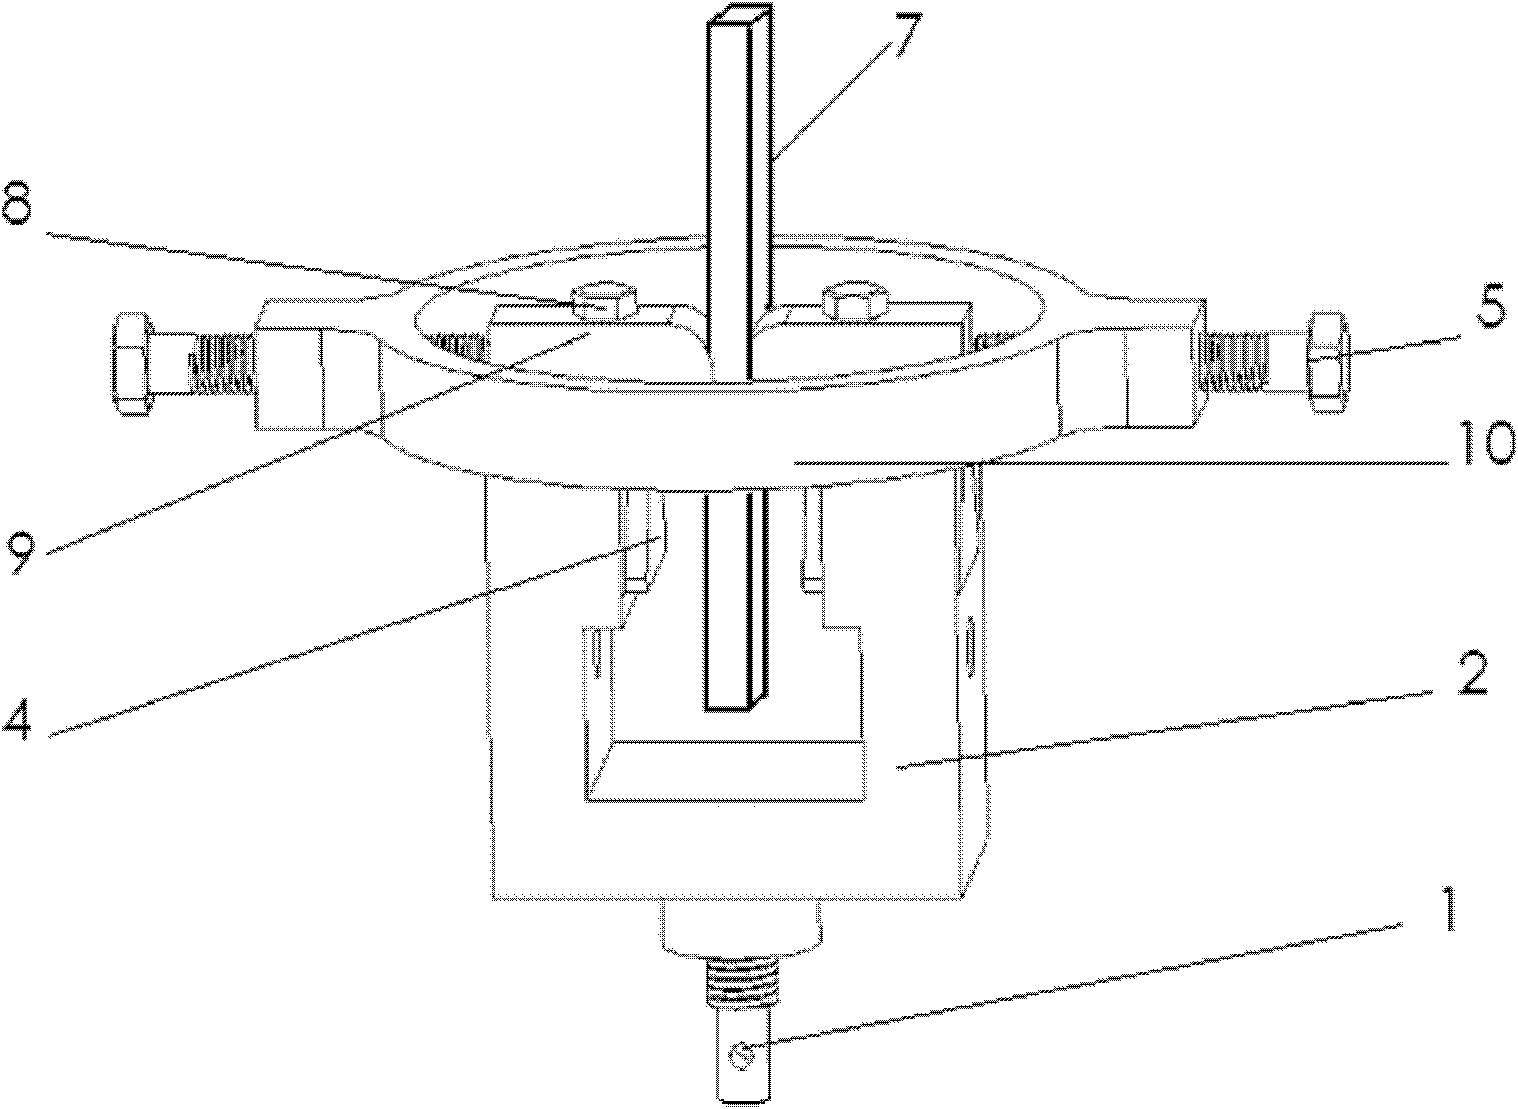 Tangential fretting test device and its test method